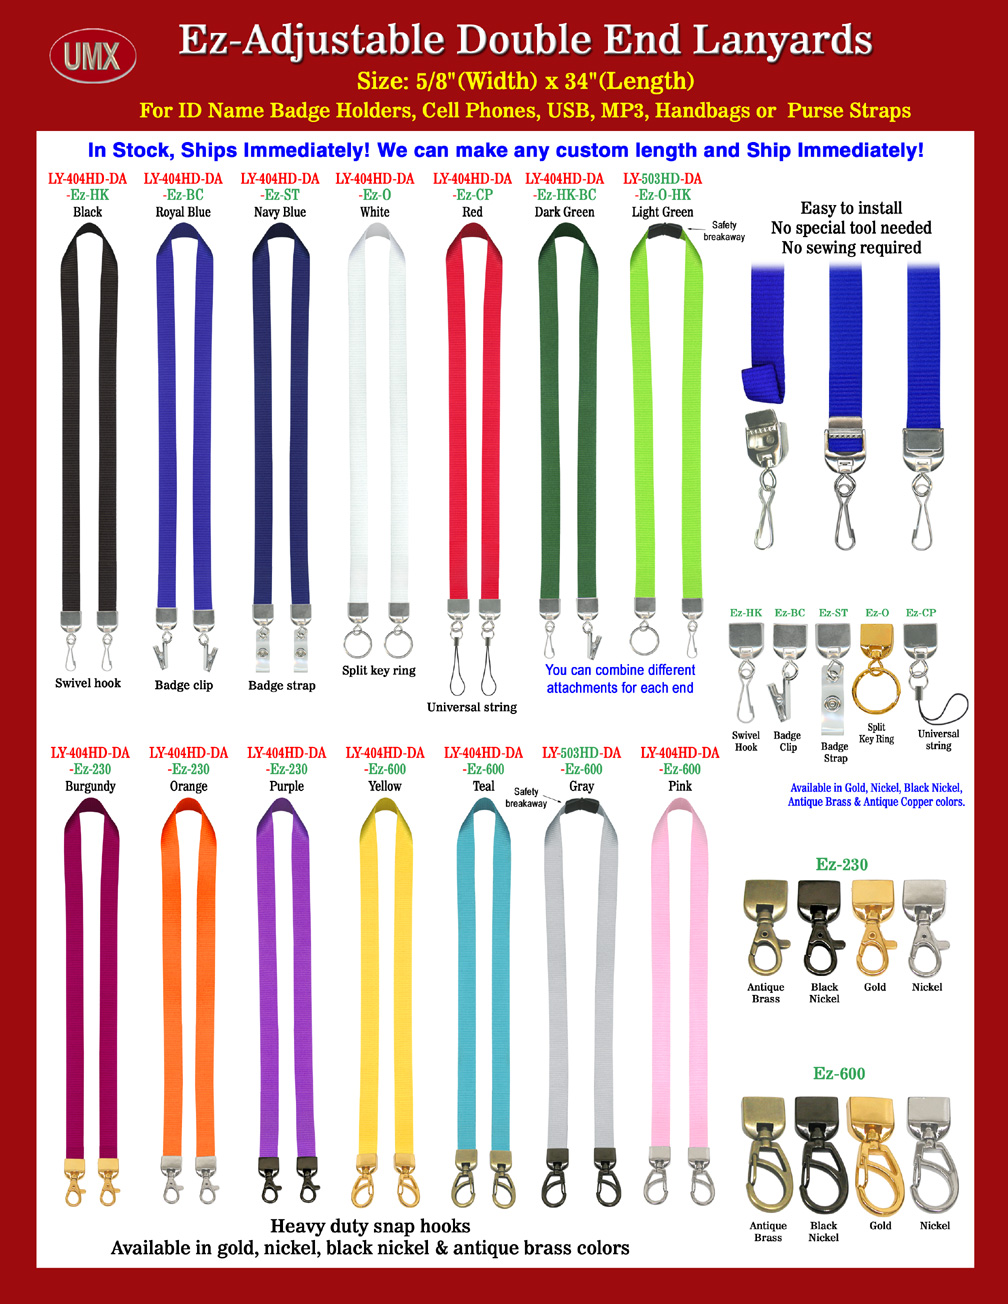 Ez-Adjustable Double Ends Plain, Non-Printed or Blank Lanyards: Variable Length With Belt or Hat Straps Style of  Cam Buckles.